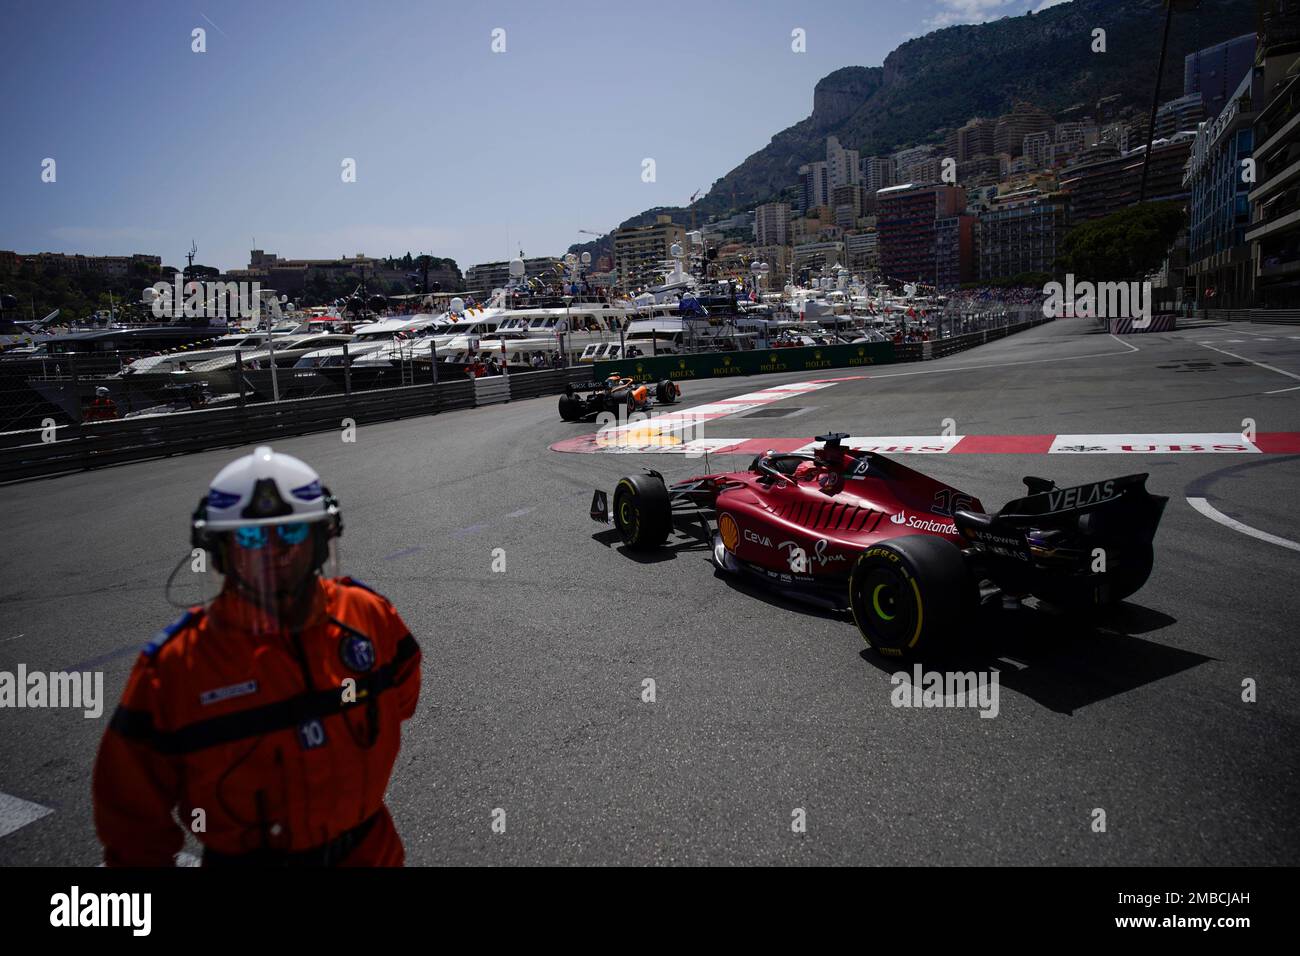 Ferrari driver Charles Leclerc of Monaco steers his car during the first free practice at the Monaco racetrack, in Monaco, Friday, May 27, 2022